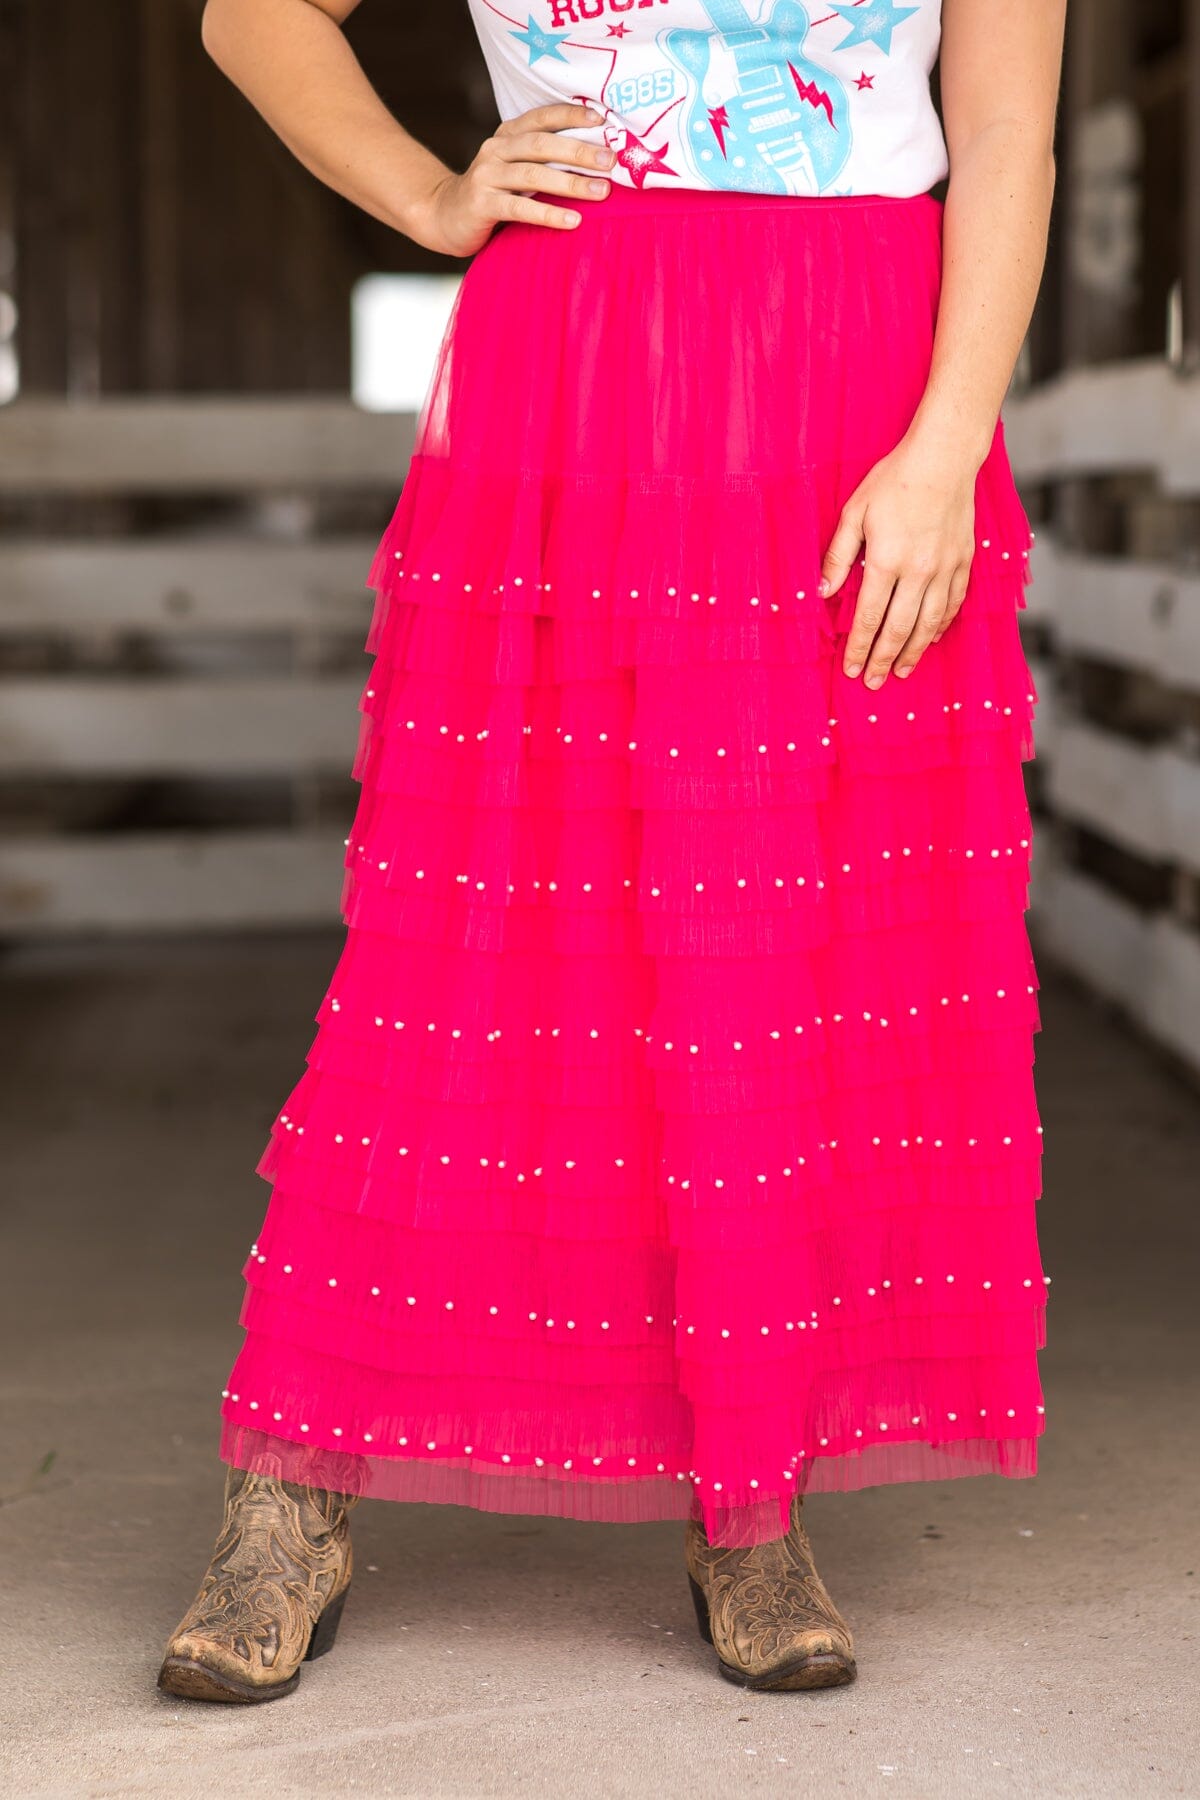 Hot Pink Tulle Midi Skirt With Pearl Detail - Filly Flair